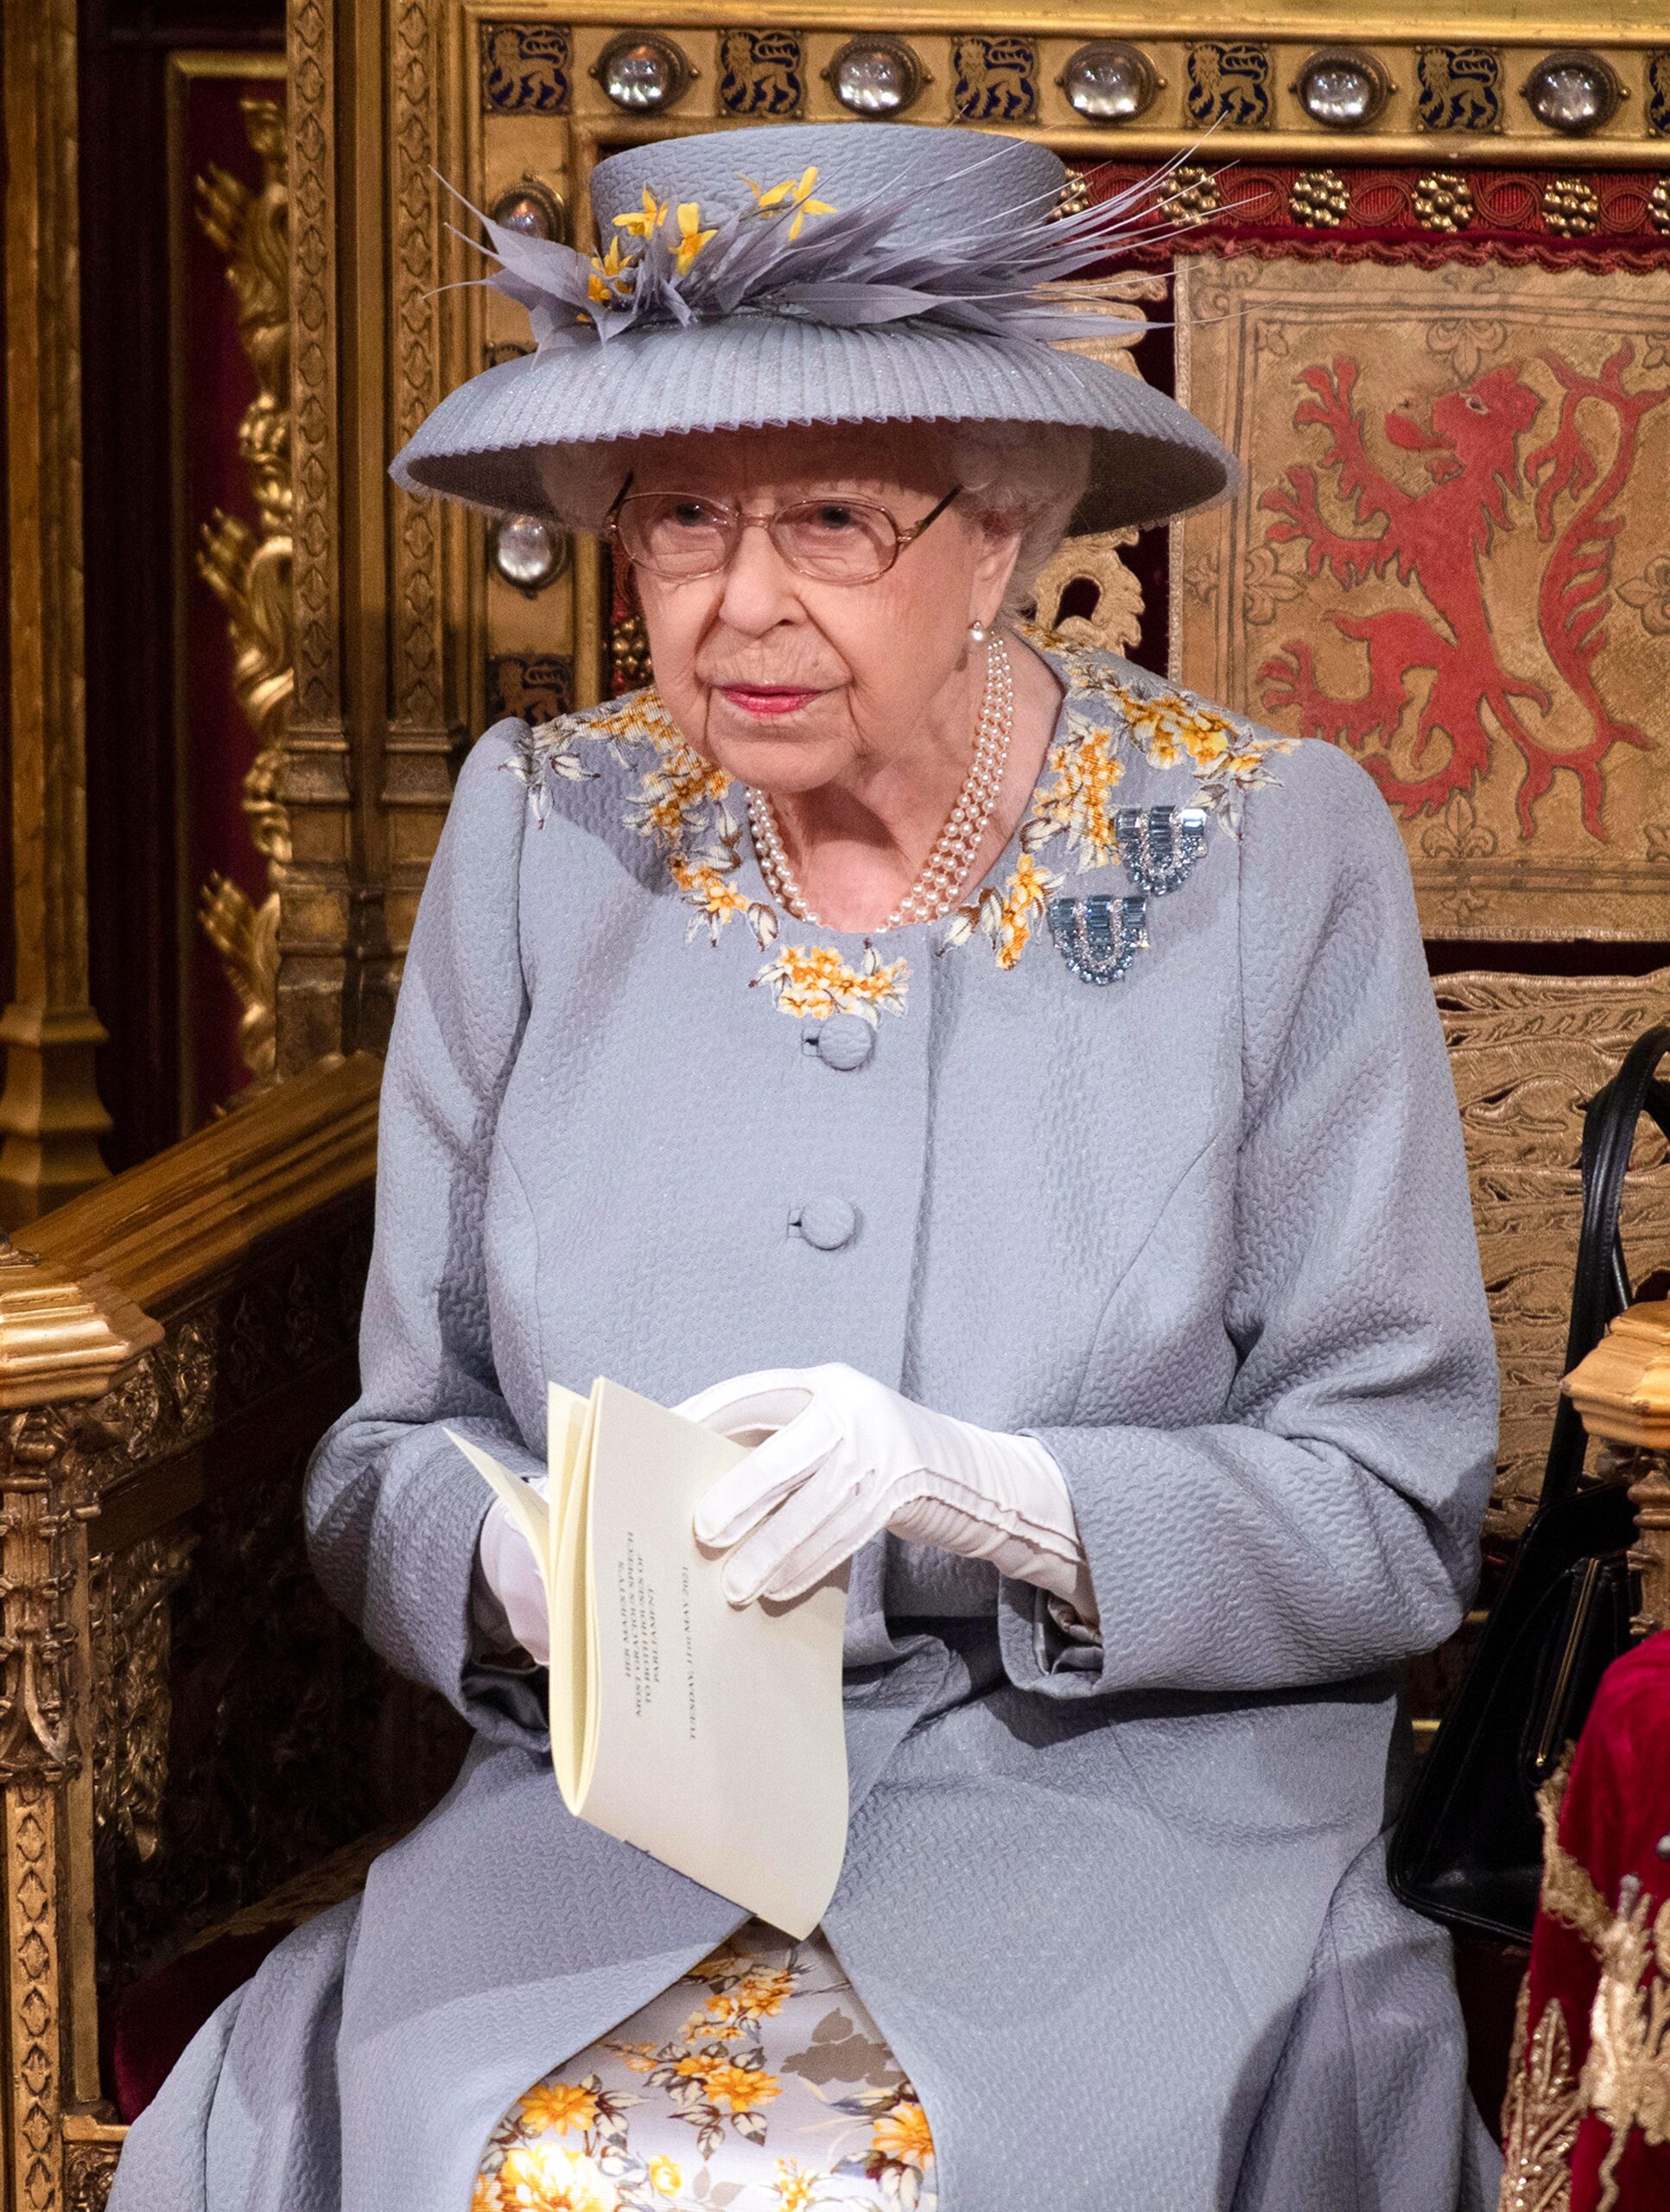 Queen Elizabeth II wearing light blue coat with yellow floral detailing and matching hat sitting on a gold and red chair at the State Opening of Parliament